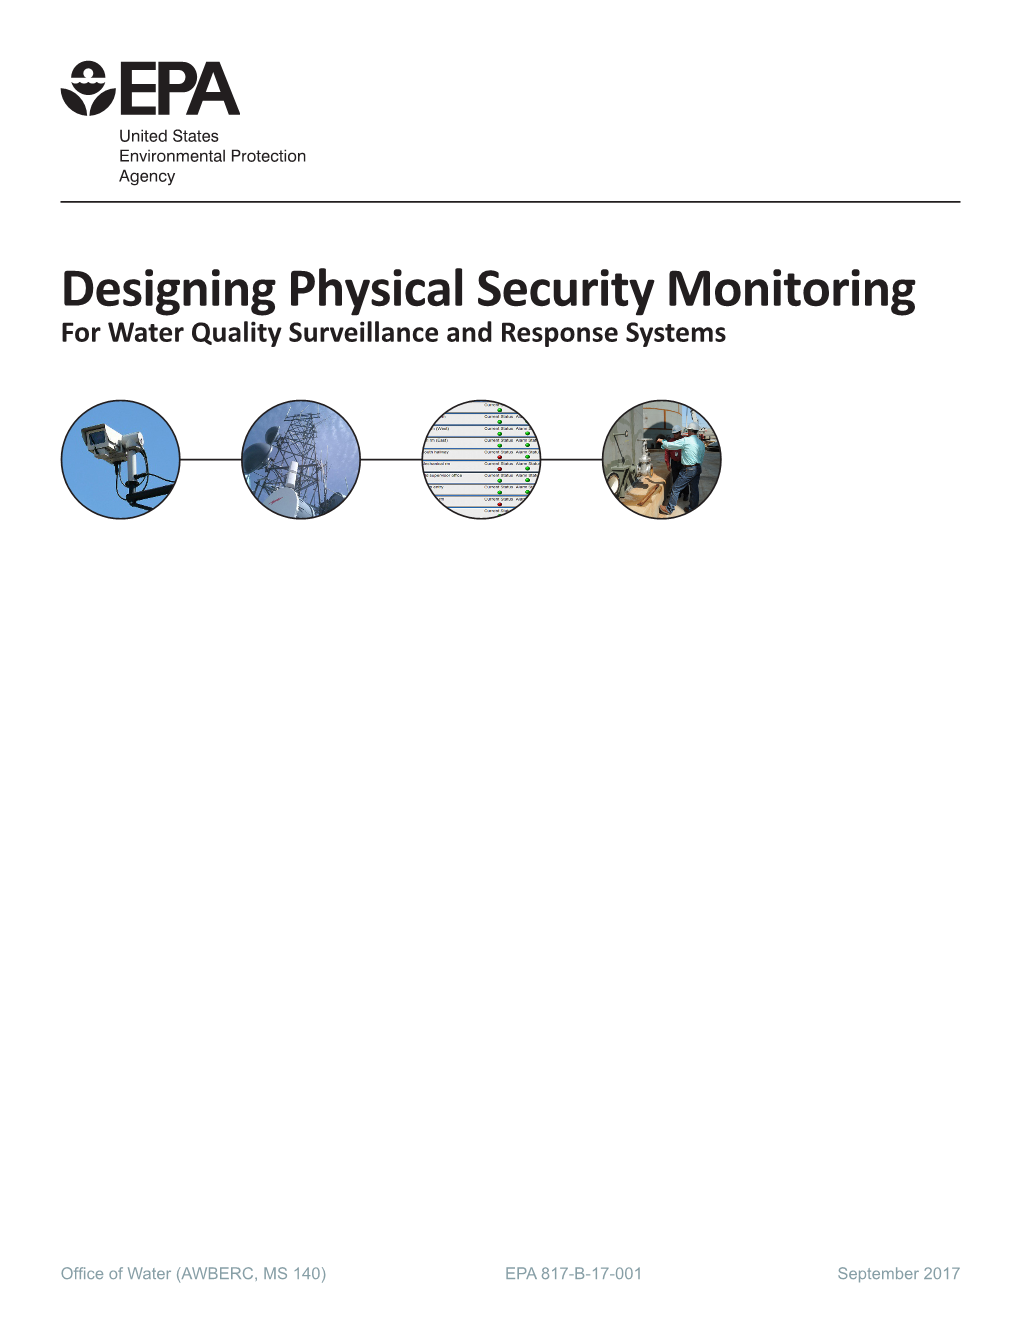 Designing Physical Security Monitoring for Water Quality Surveillance and Response Systems